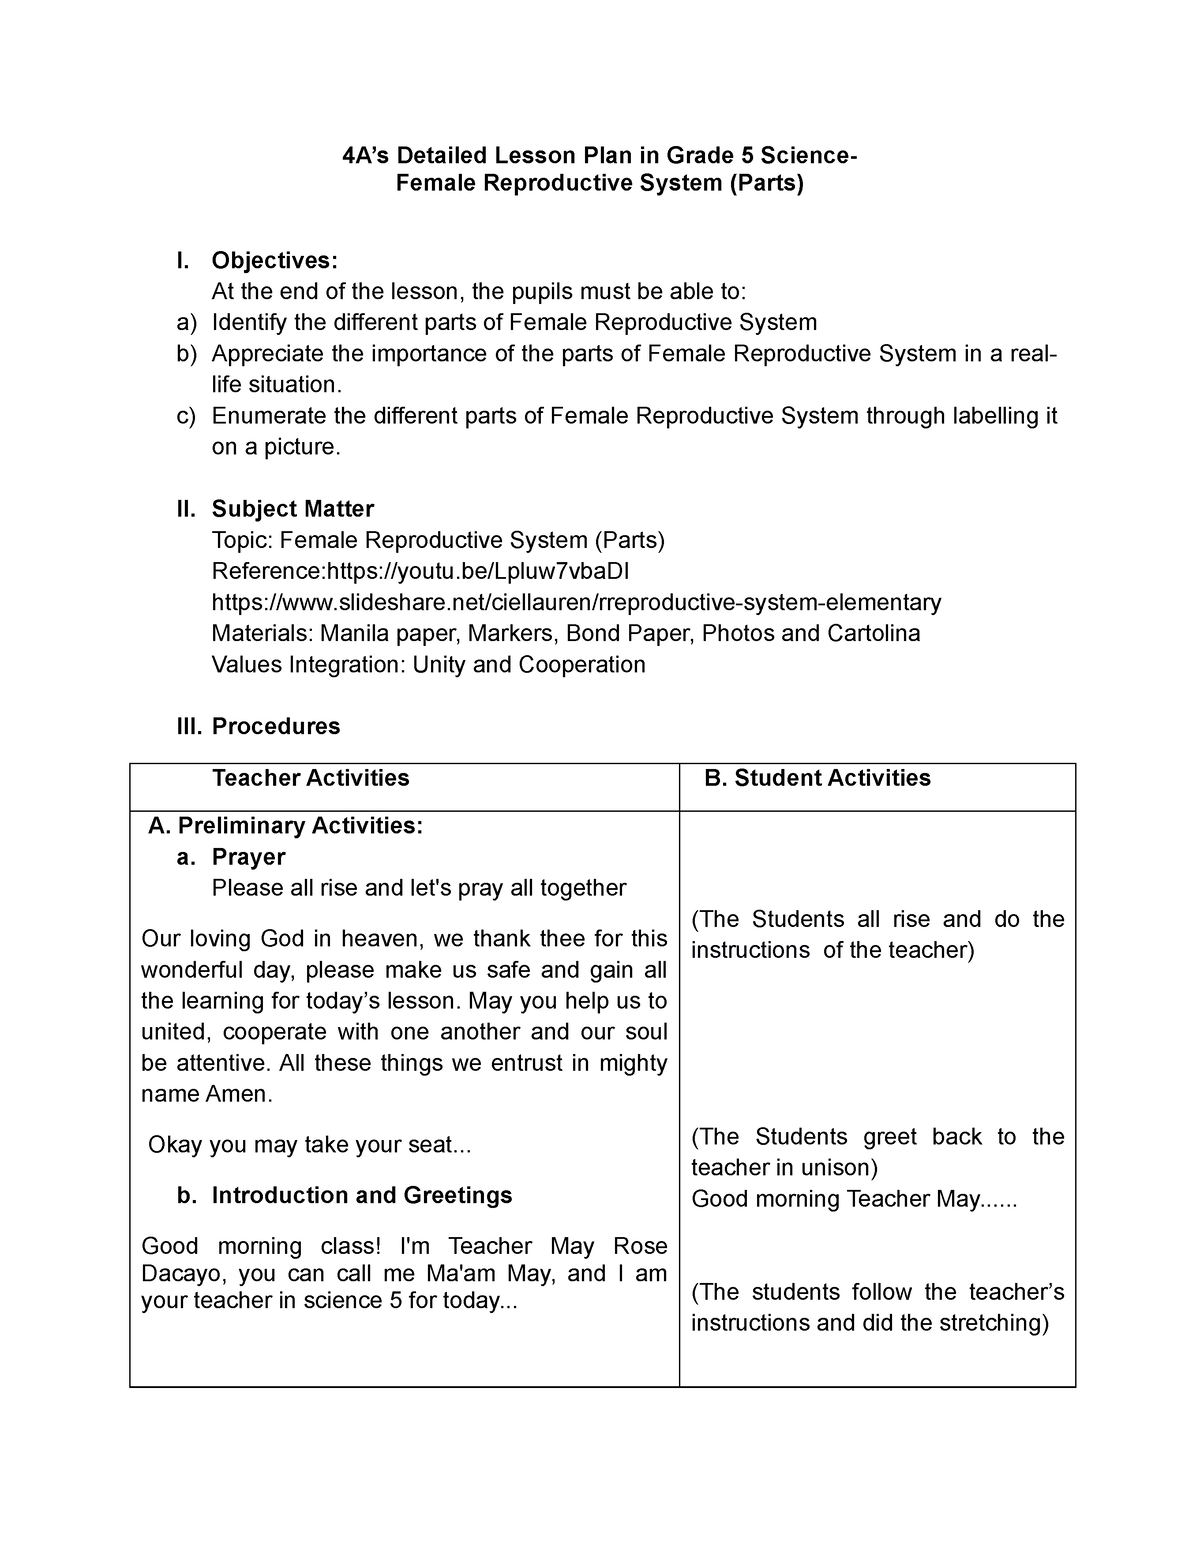 Detailed Lesson Plan Final 4as Detailed Lesson Plan In Grade 5 Science Female Reproductive 9546